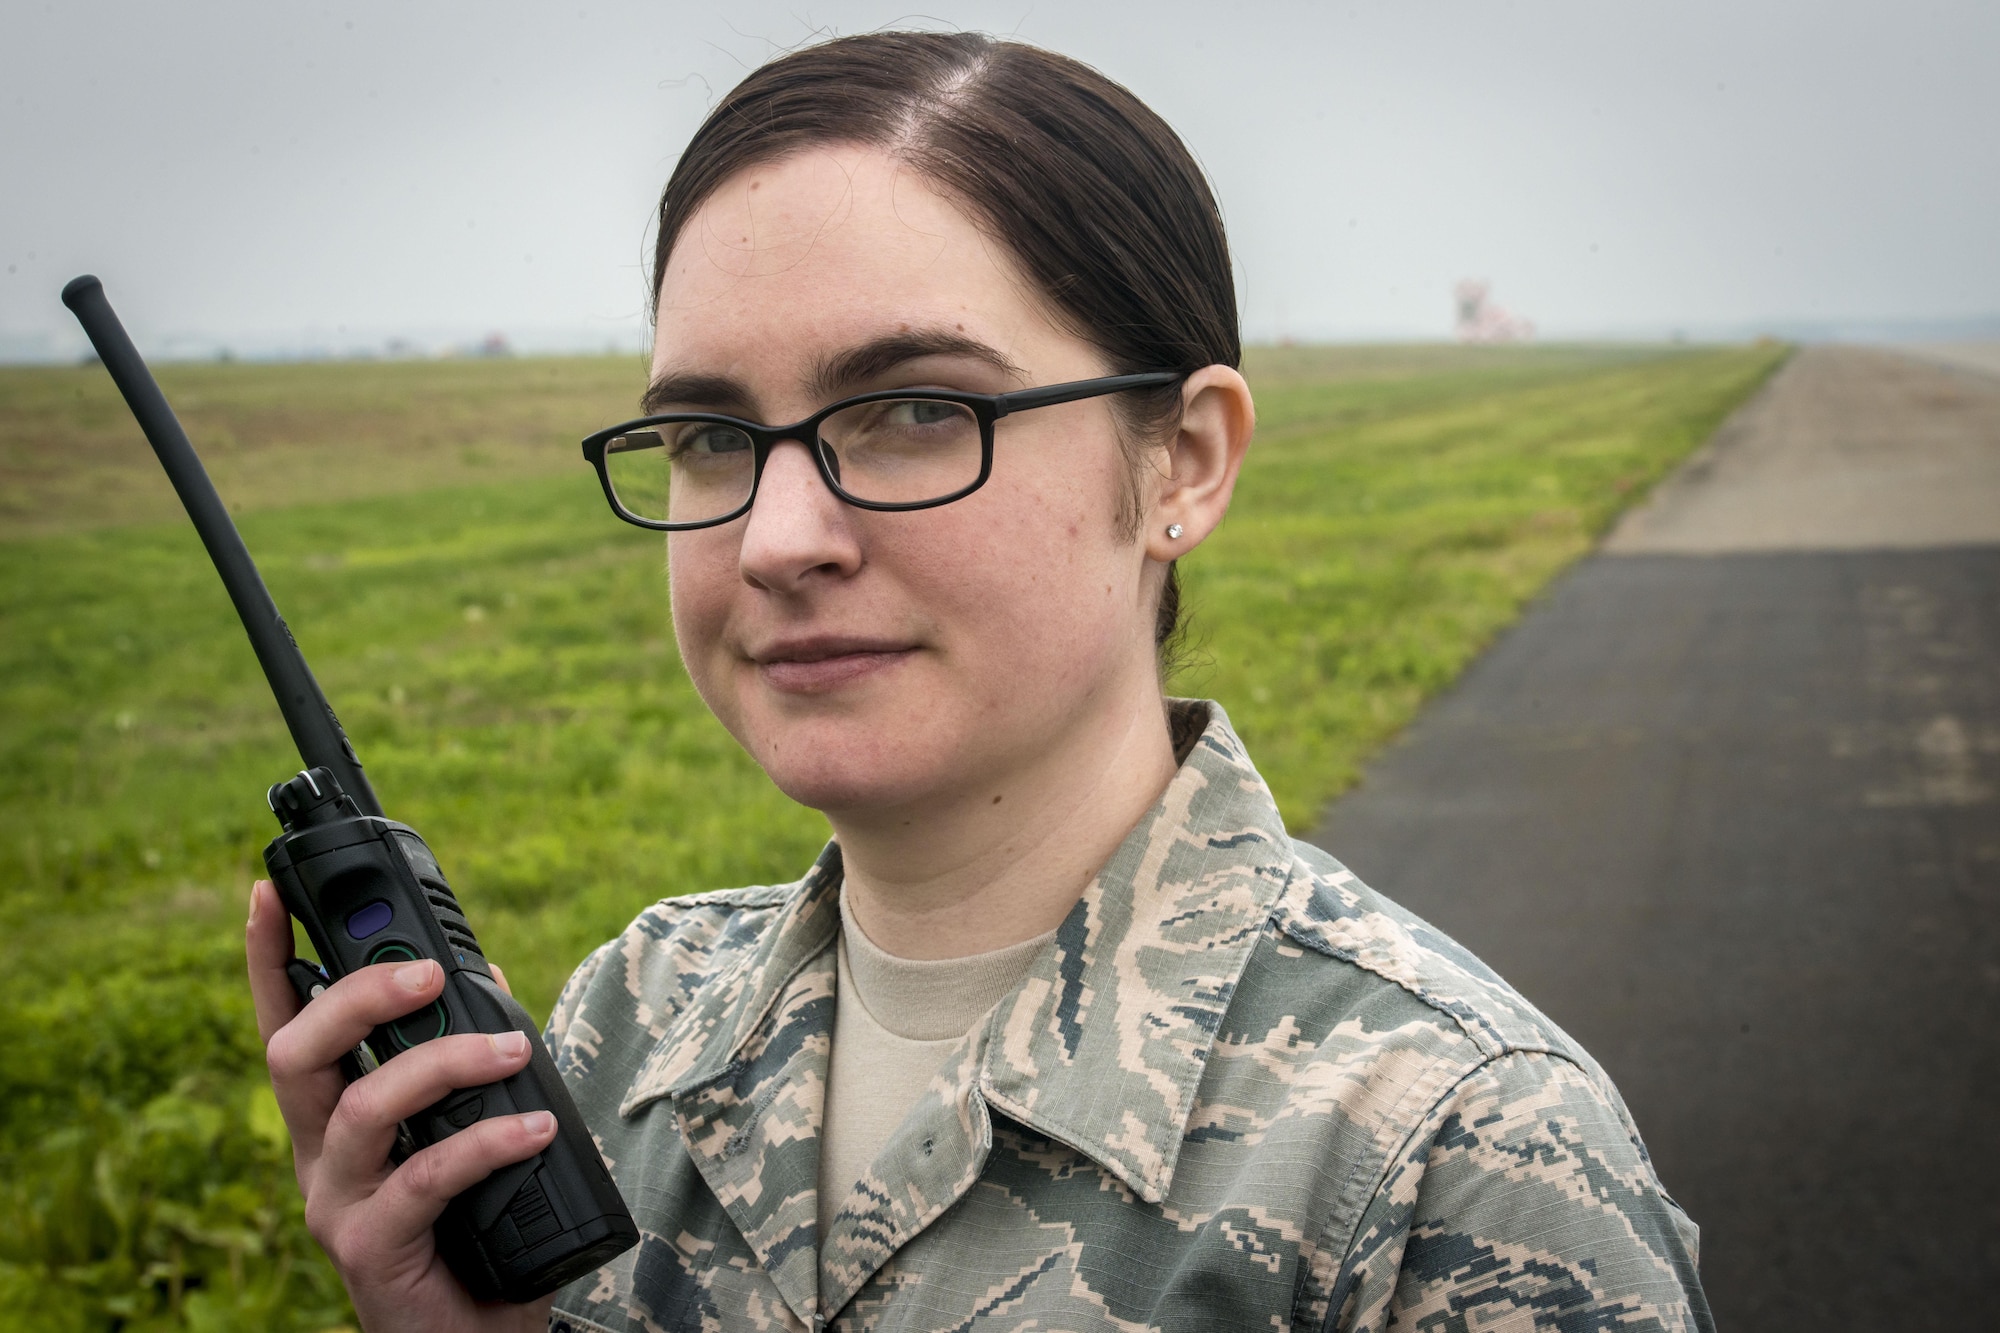 U.S. Air Force Airman 1st Class Kelly Coats, a 35th Operations Support Squadron airfield manager, poses for a photo on the flight line at Misawa Air Base, Japan, May 25, 2017. In her capacity, Coats cares for the maintenance of runways, lighting and other airfield components and systems, and helps ensure all takeoffs and landings can proceed without incident. When she’s not working, she’s drawing the base’s comic strip, “Airmanitis.” Coats’ art is her escape from reality lending to her resiliency as a warfighter in the Pacific theater. (U.S. Air Force photo by Tech. Sgt. Benjamin W. Stratton)